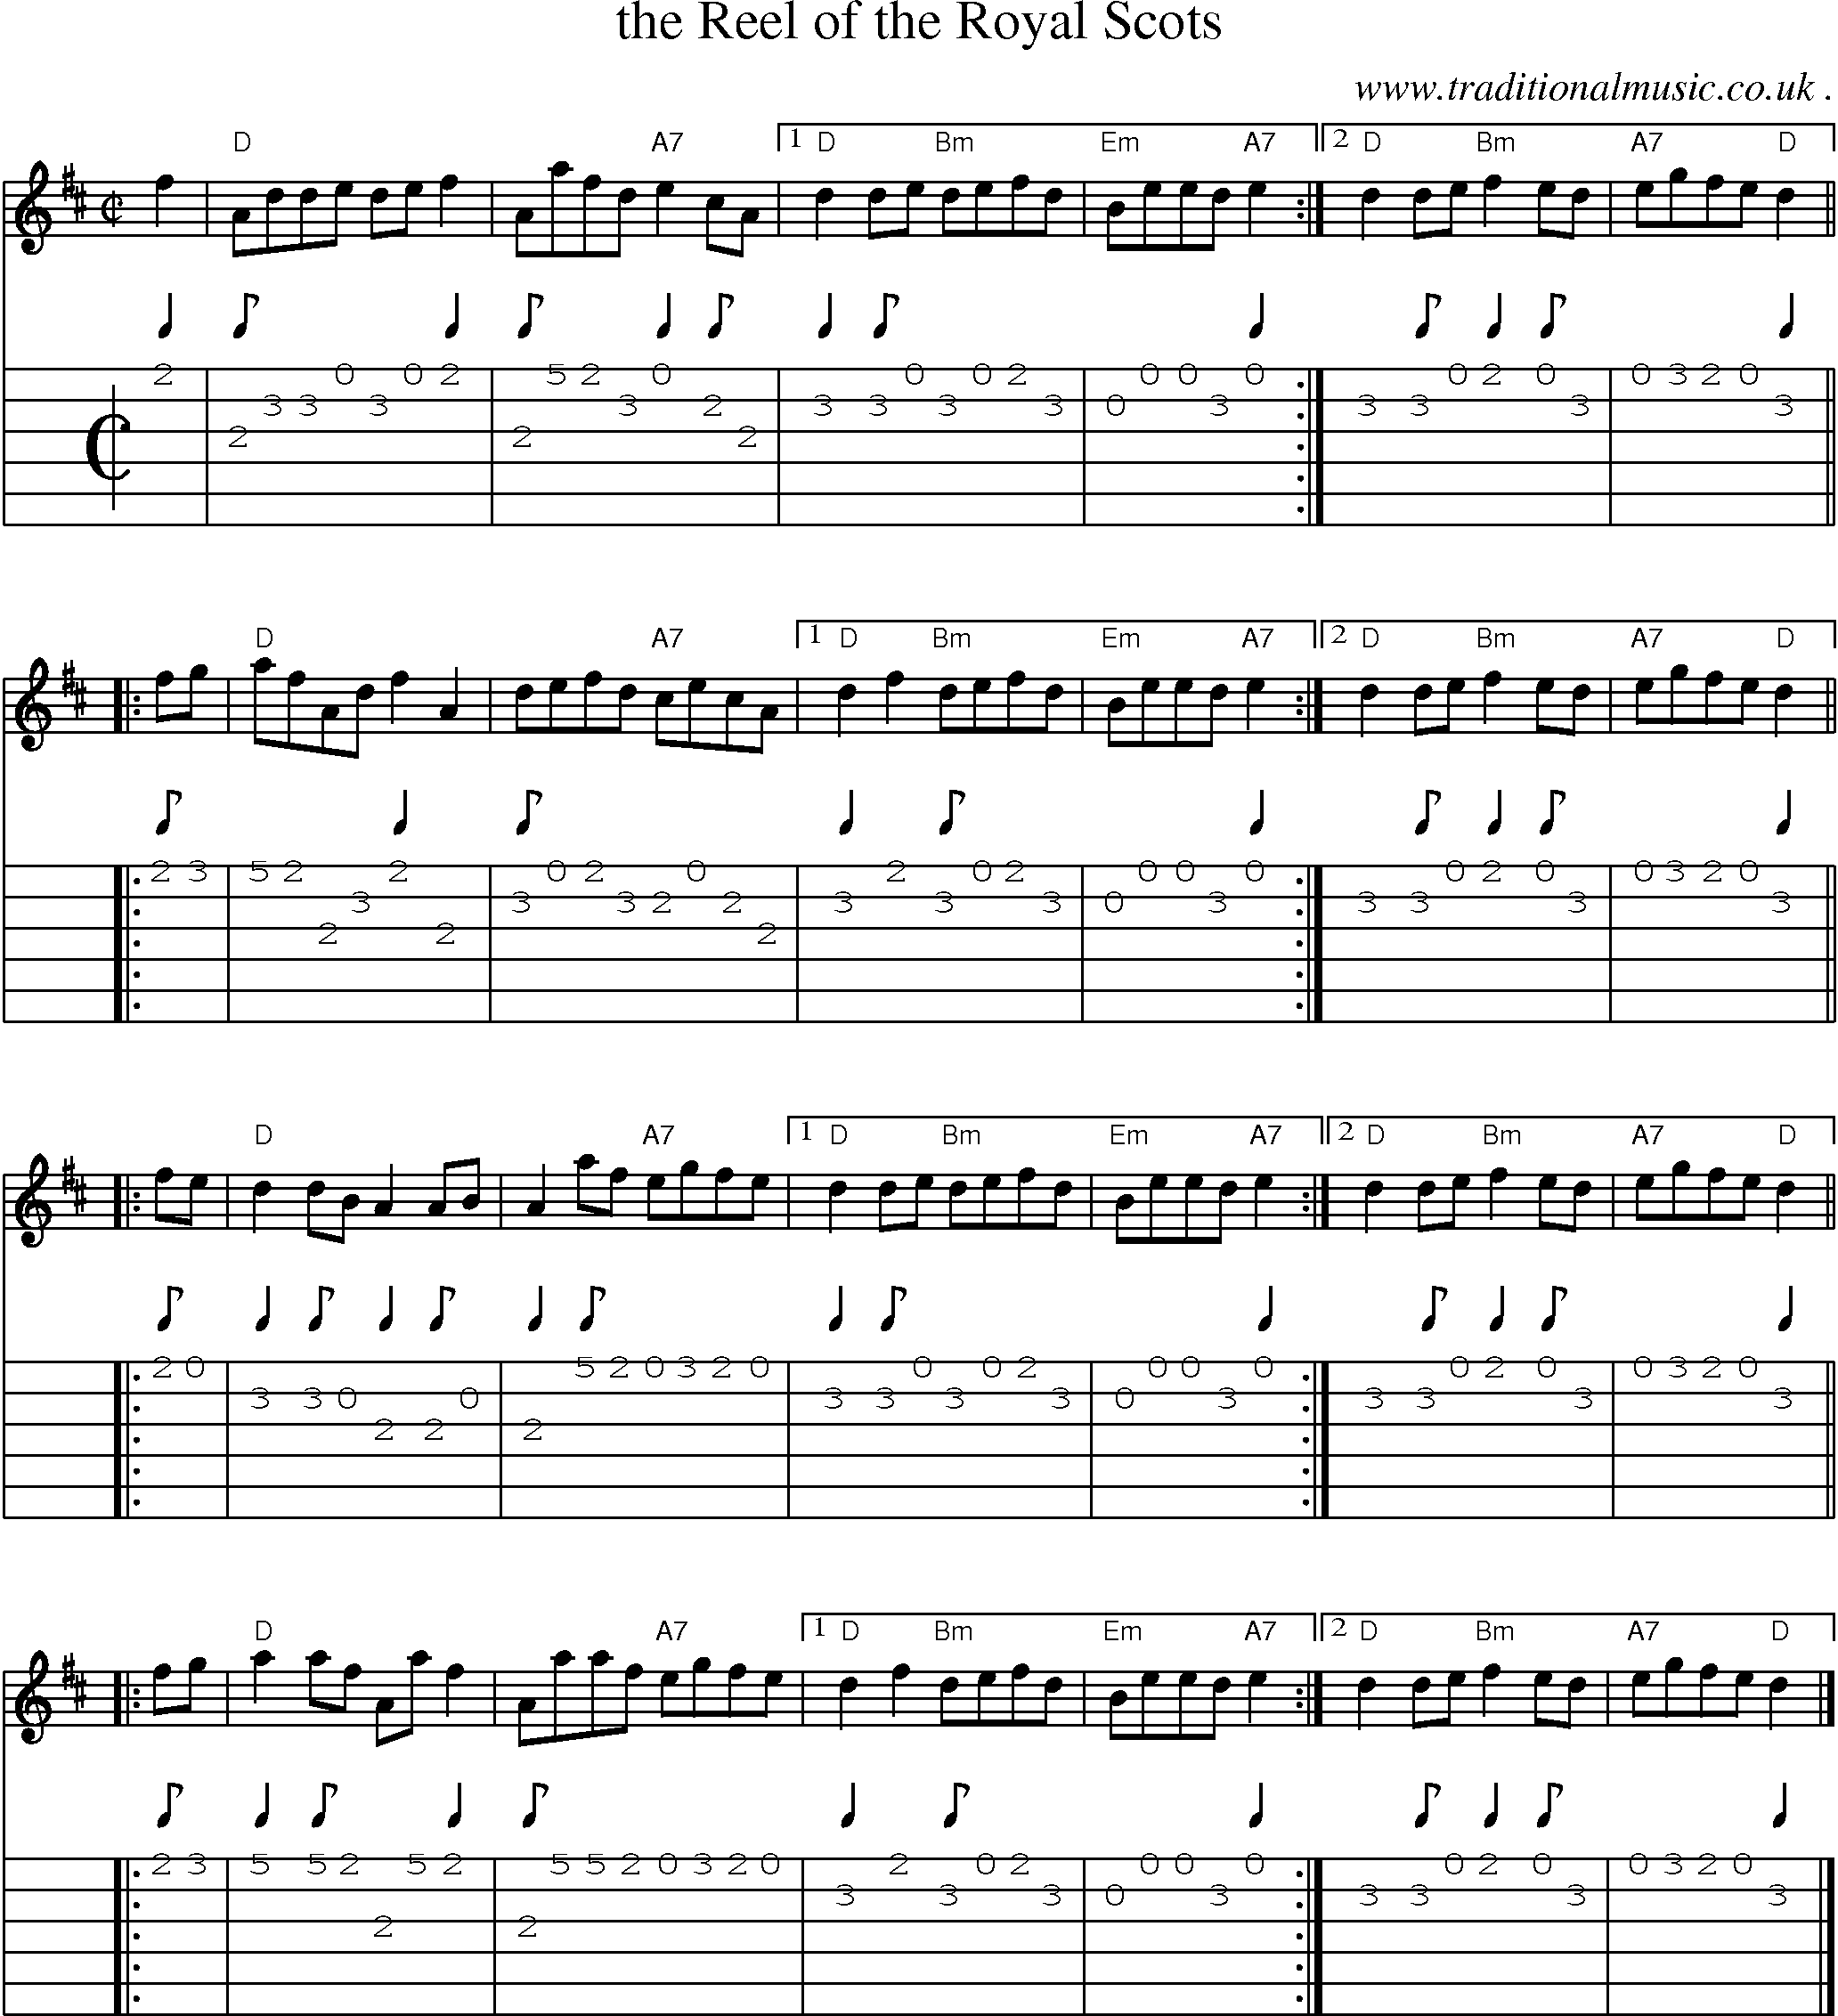 Sheet-music  score, Chords and Guitar Tabs for The Reel Of The Royal Scots